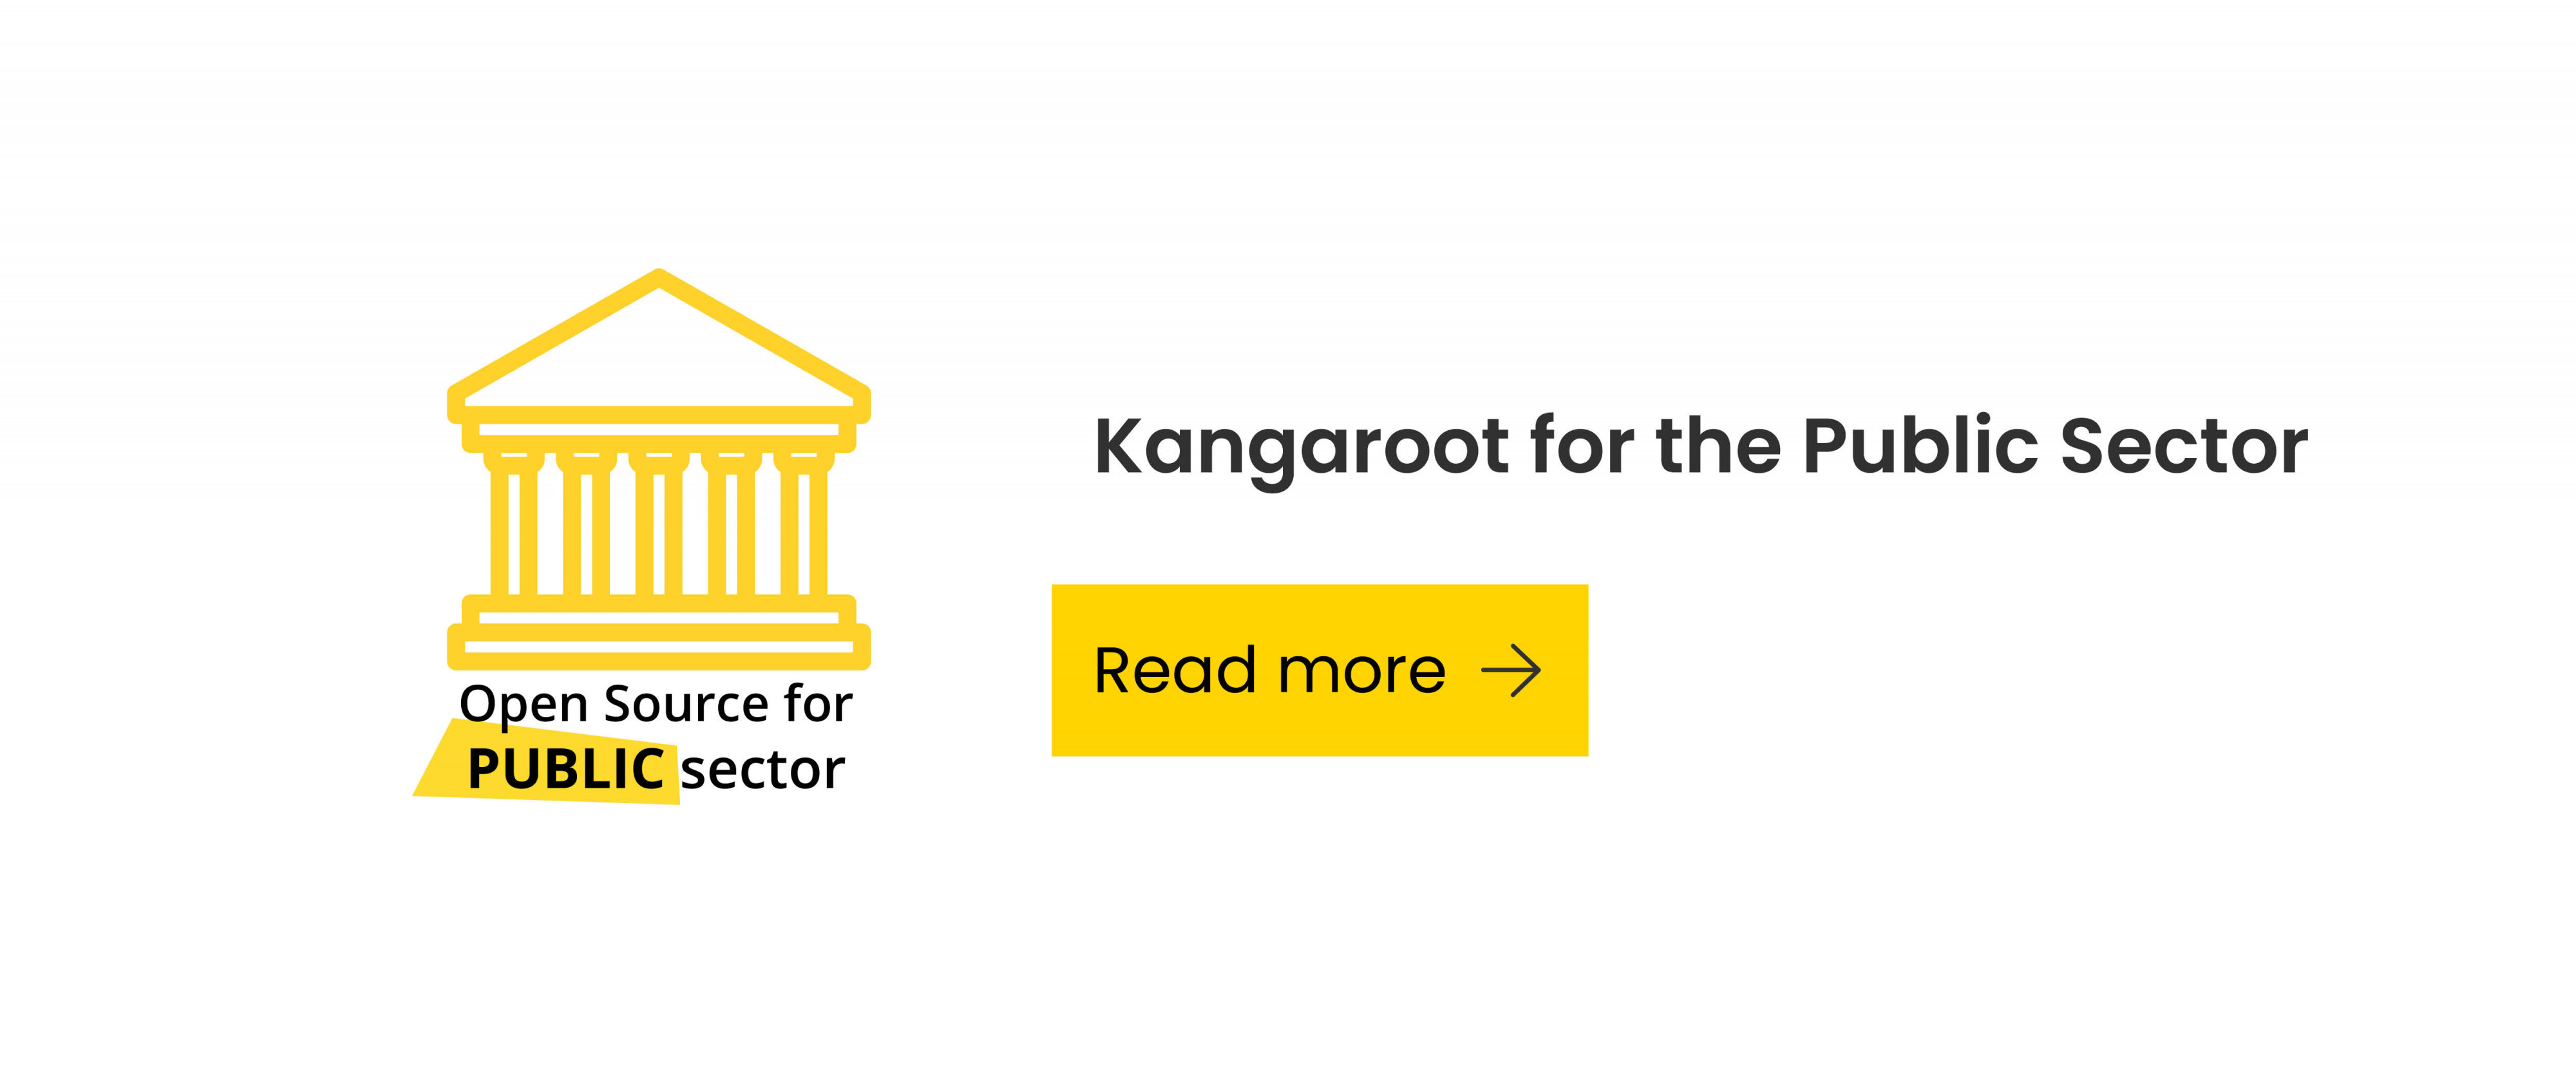 Kangaroot for the Public Sector